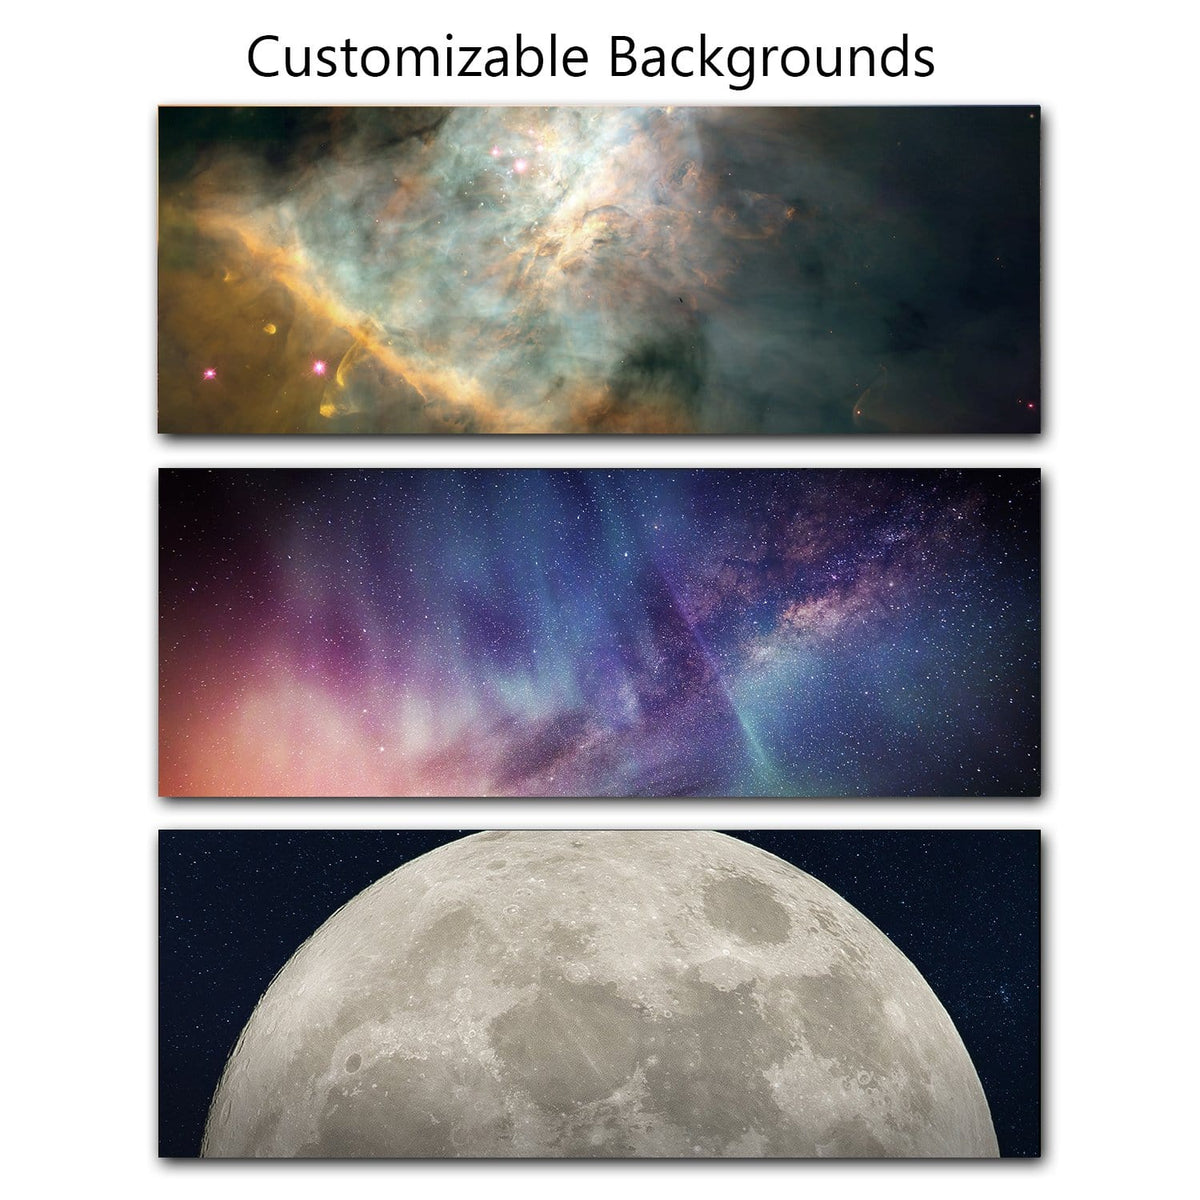 Select from several great outer space background options for your personalized art